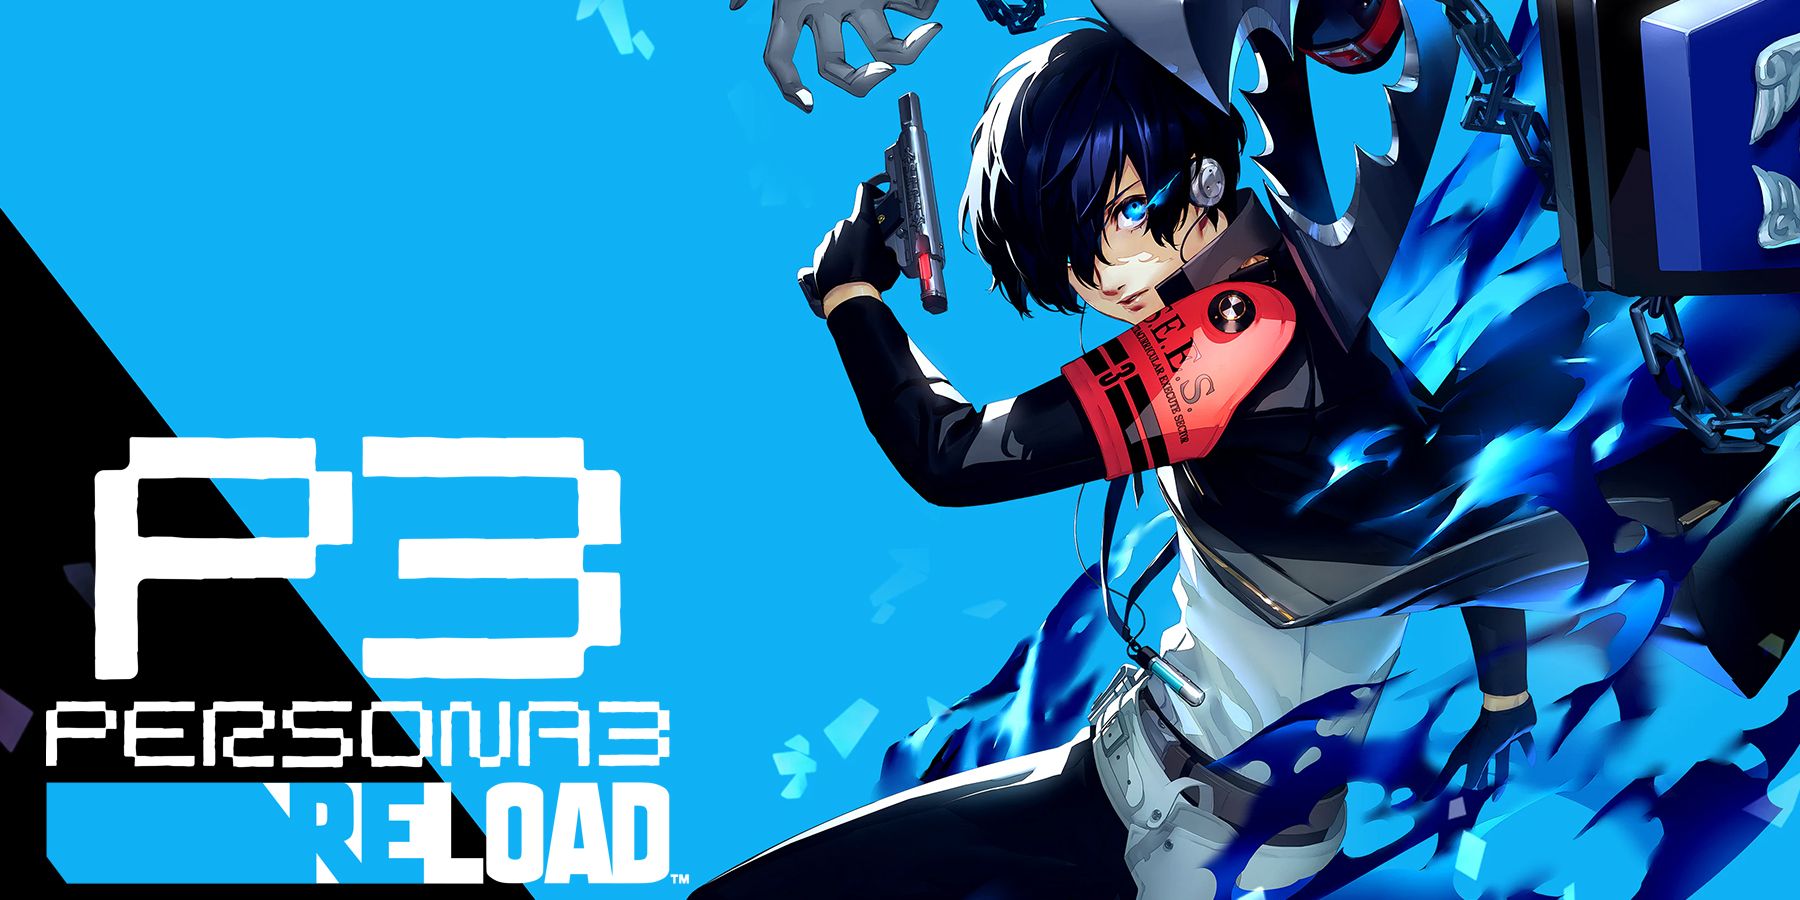 Persona 3 Reload Xbox Store Makoto cover artwork with game logo 2x1 crop